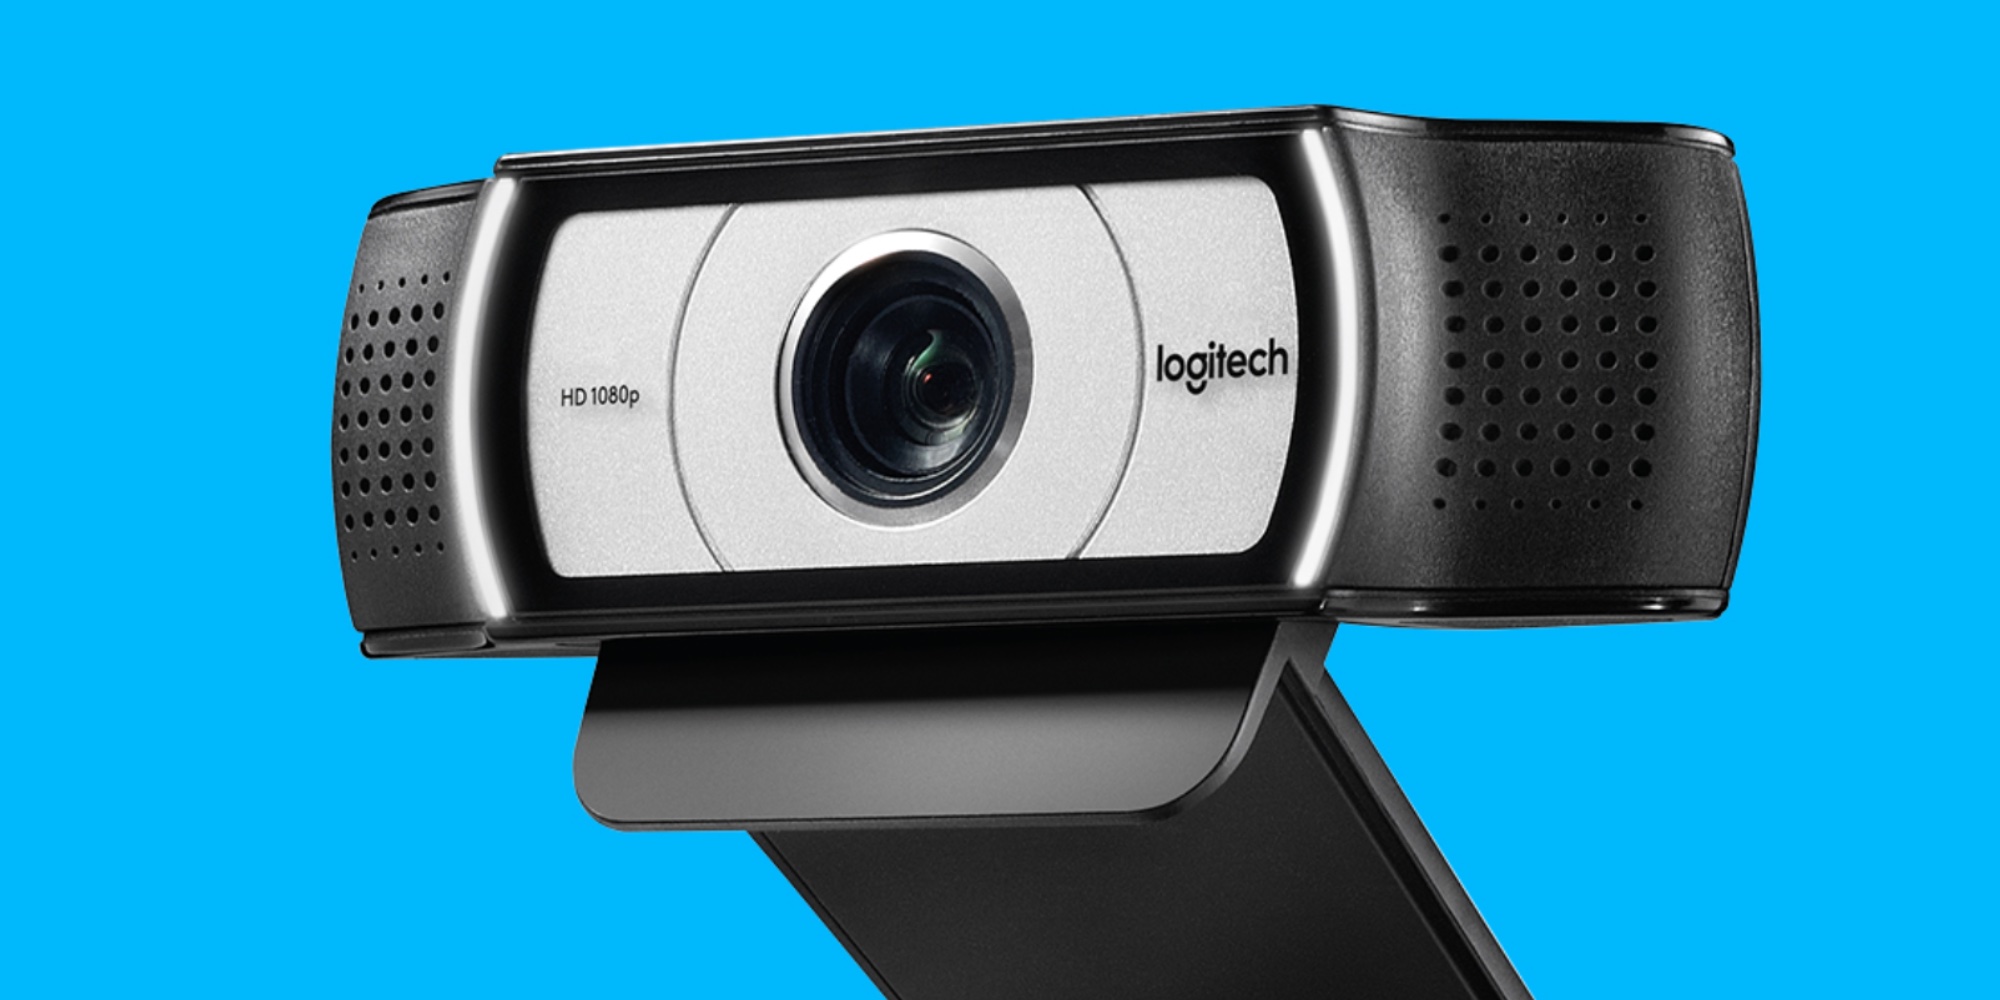 Specialisere gård Abnorm Finally upgrade your Zoom game with Logitech's 1080p C930e Webcam at $70  (Save 30%)